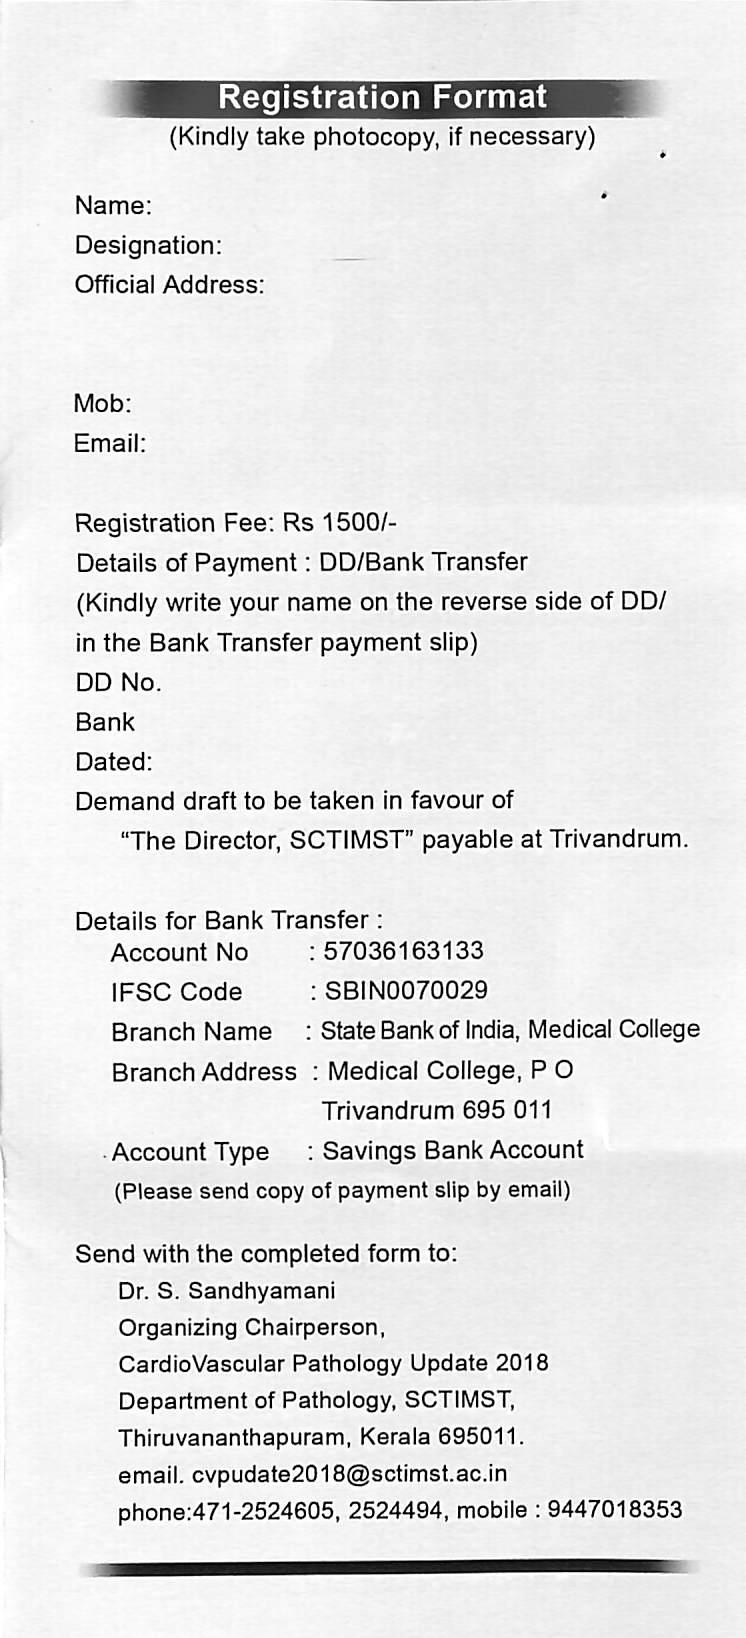 Registration Format (Kindly take photocopy, if necessary) Name; Designation: Official Address: Email: Registration Fee: Rs 1500/- Details of Payment: DD/Bank Transfer (Kindly write your name on the